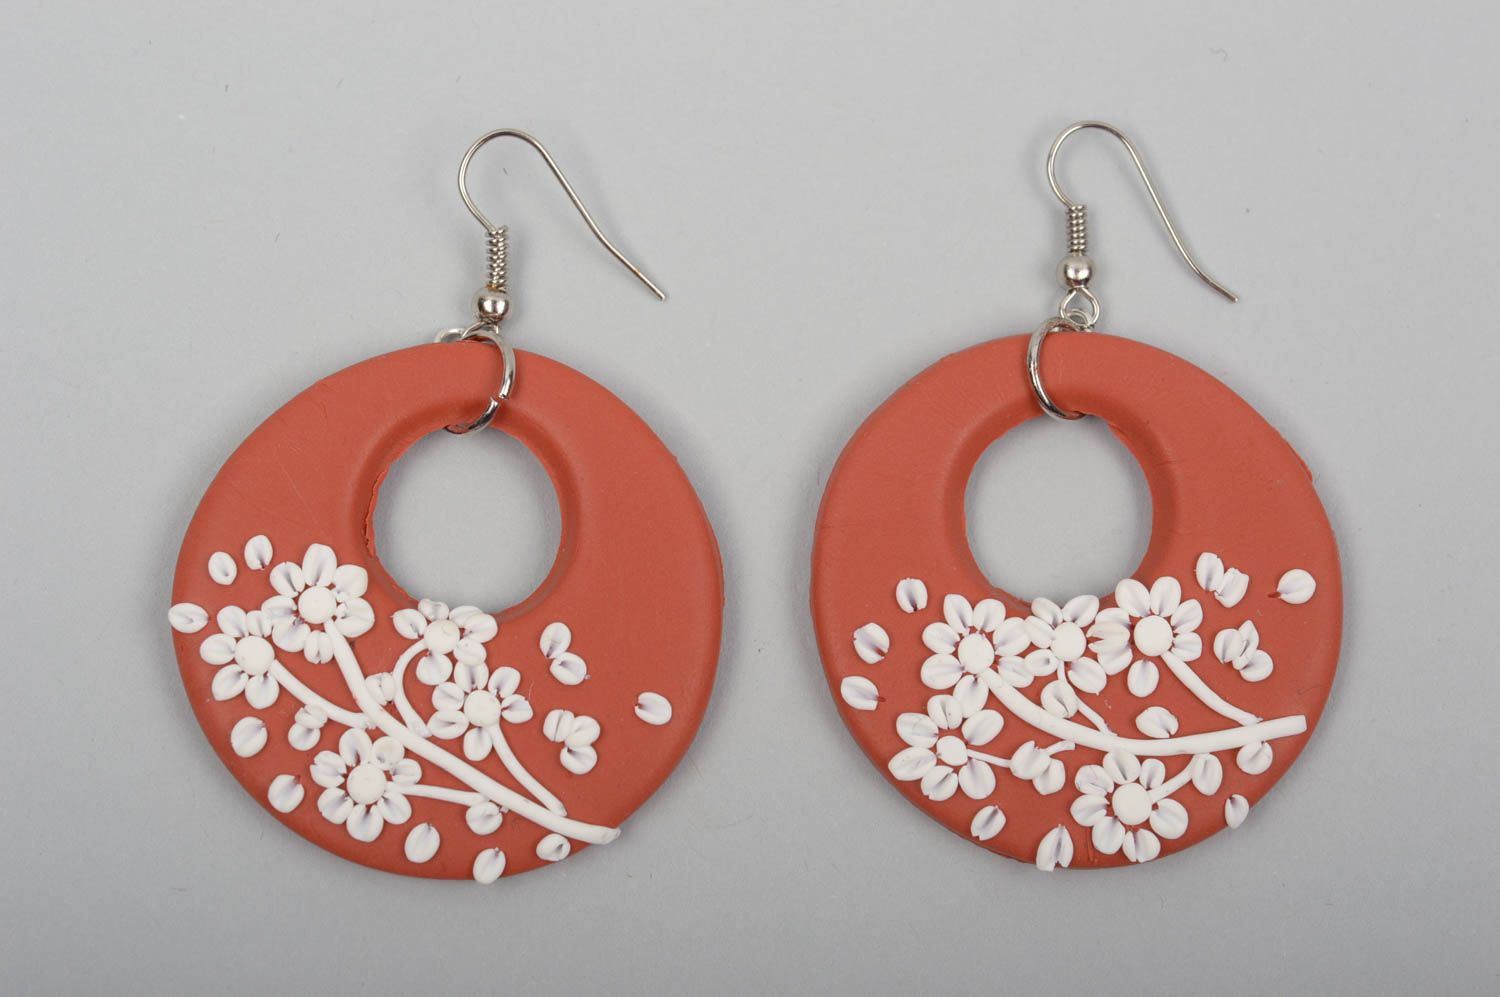 Fashion earrings polymer clay handmade jewelry women accessories gifts for her photo 1